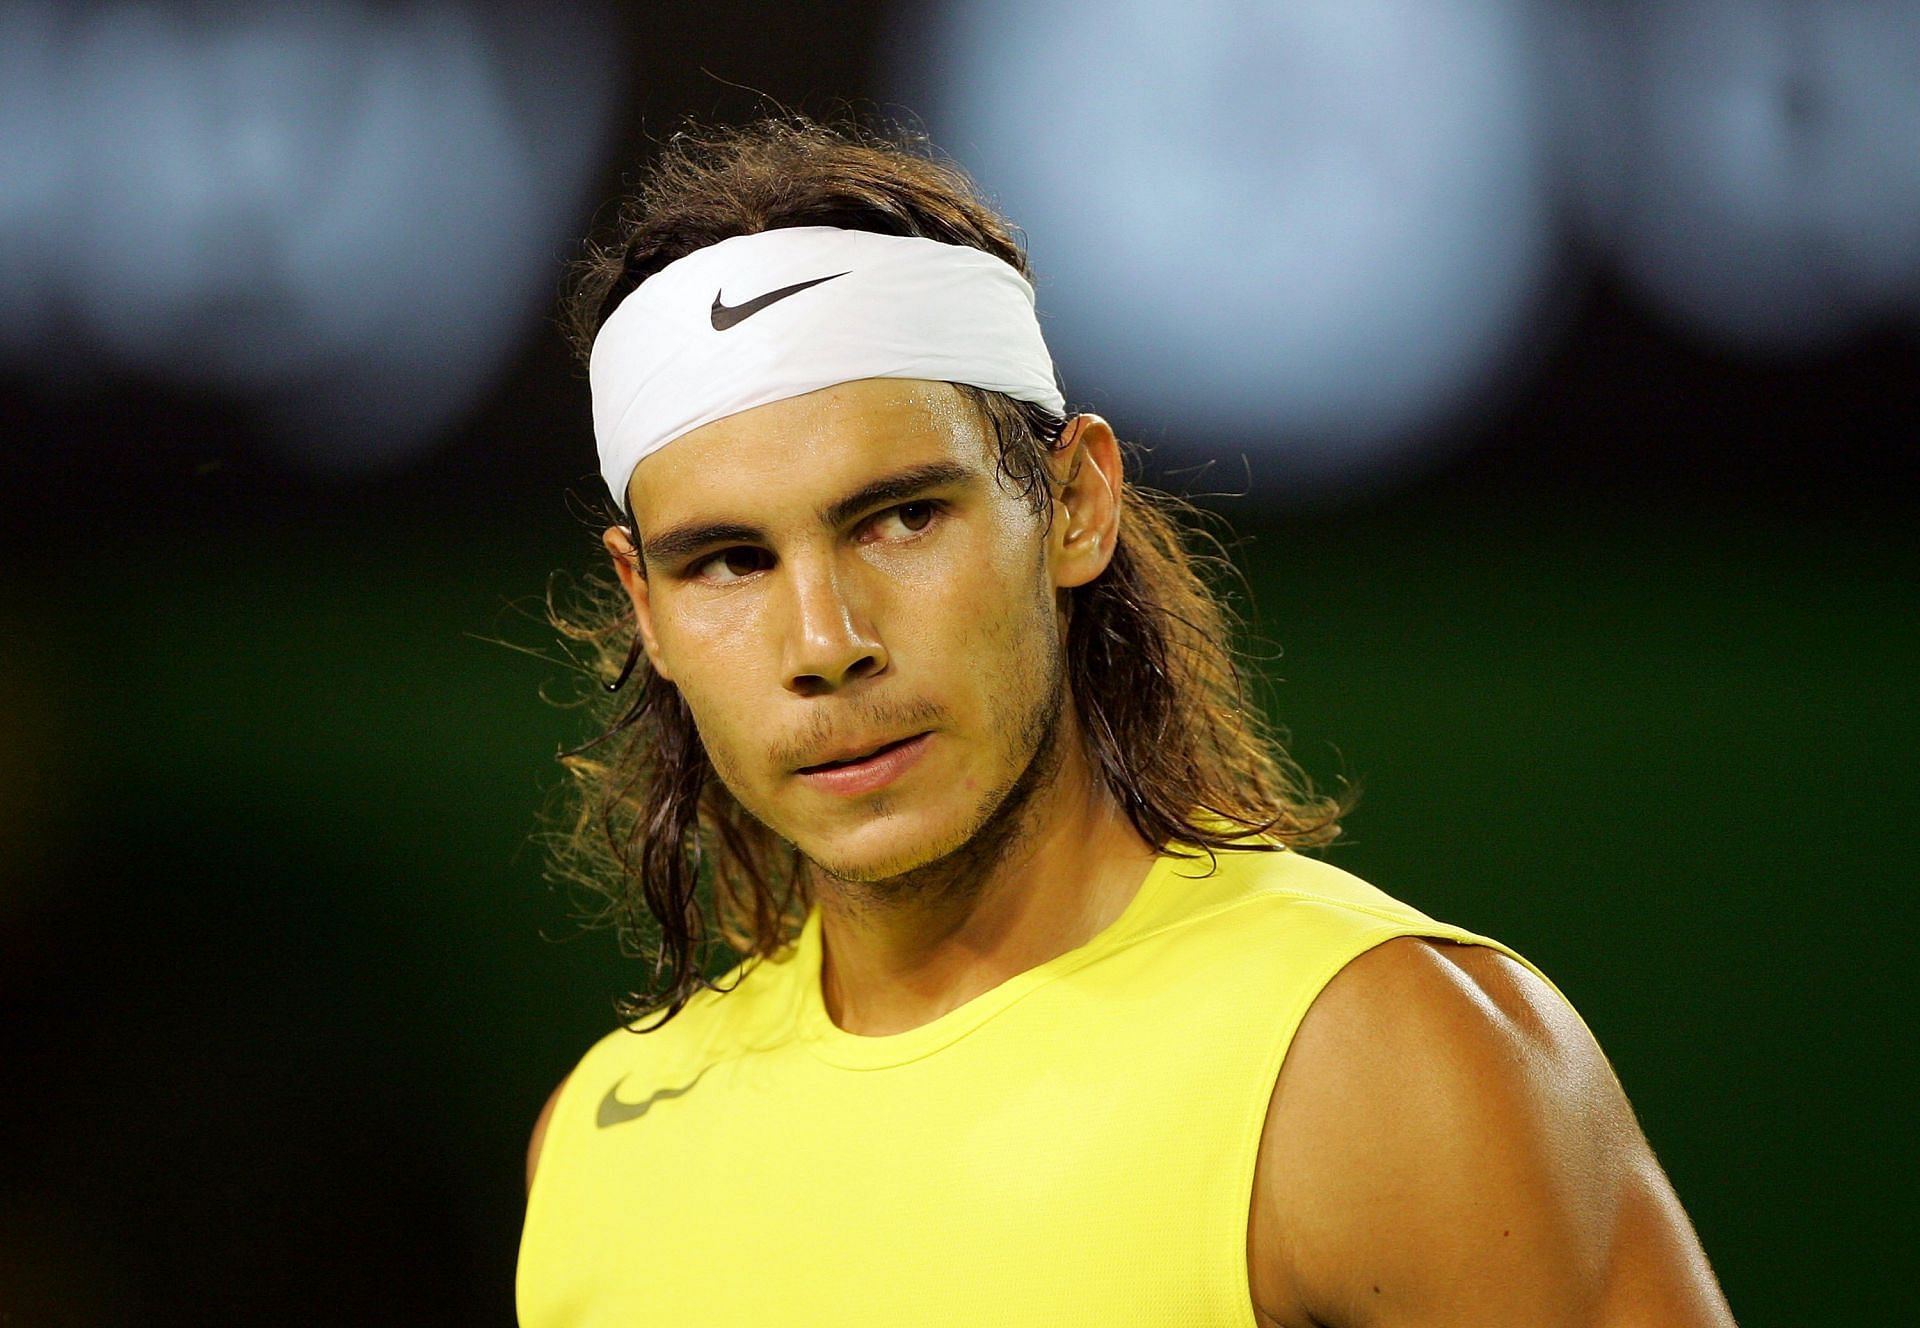 Rafael Nadal pictured at the 2007 Australian Open